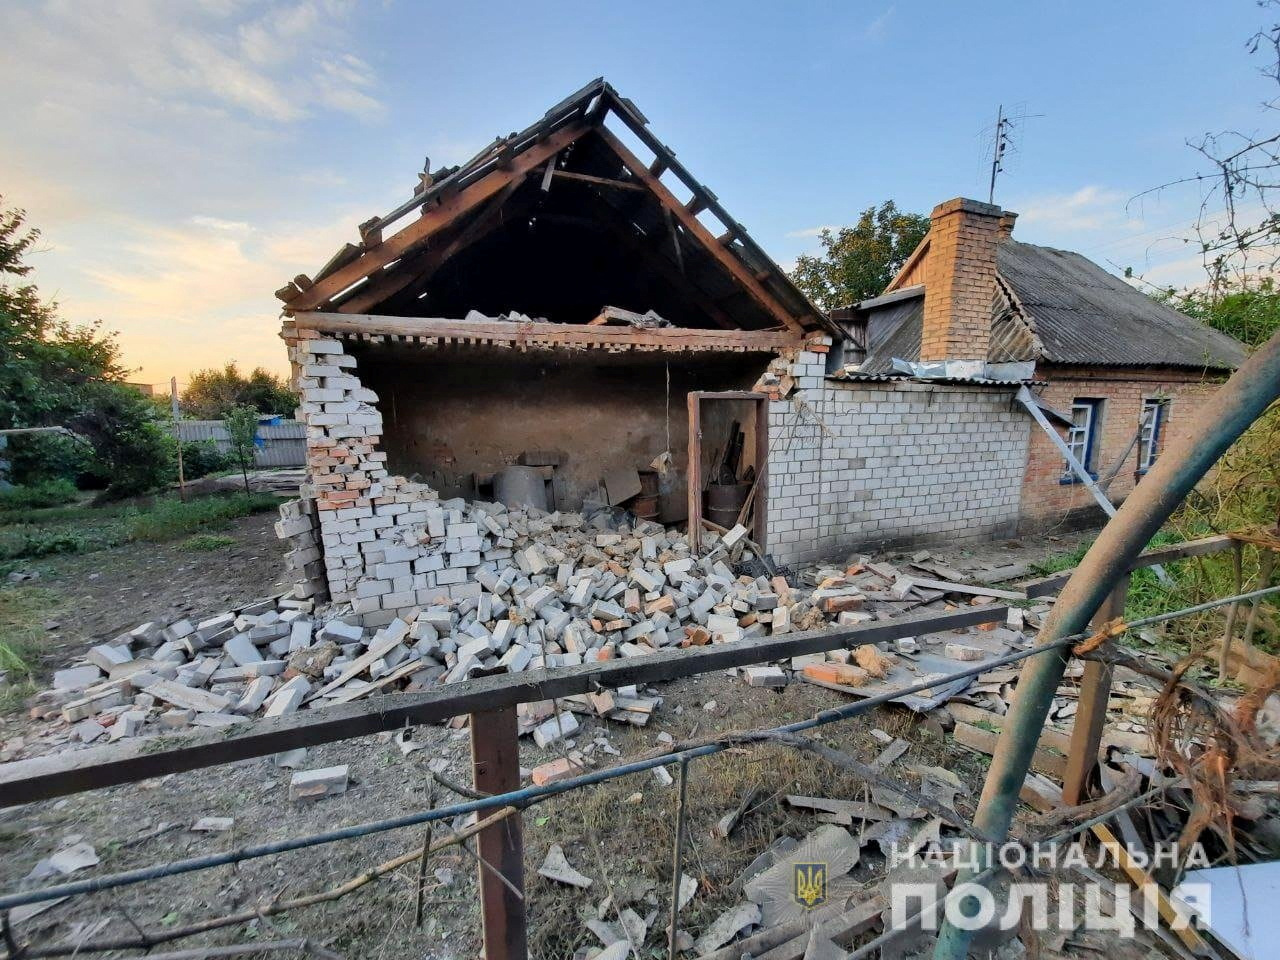 View shows a residential housw damaged by a Russian military strike in location given as Marhanets town